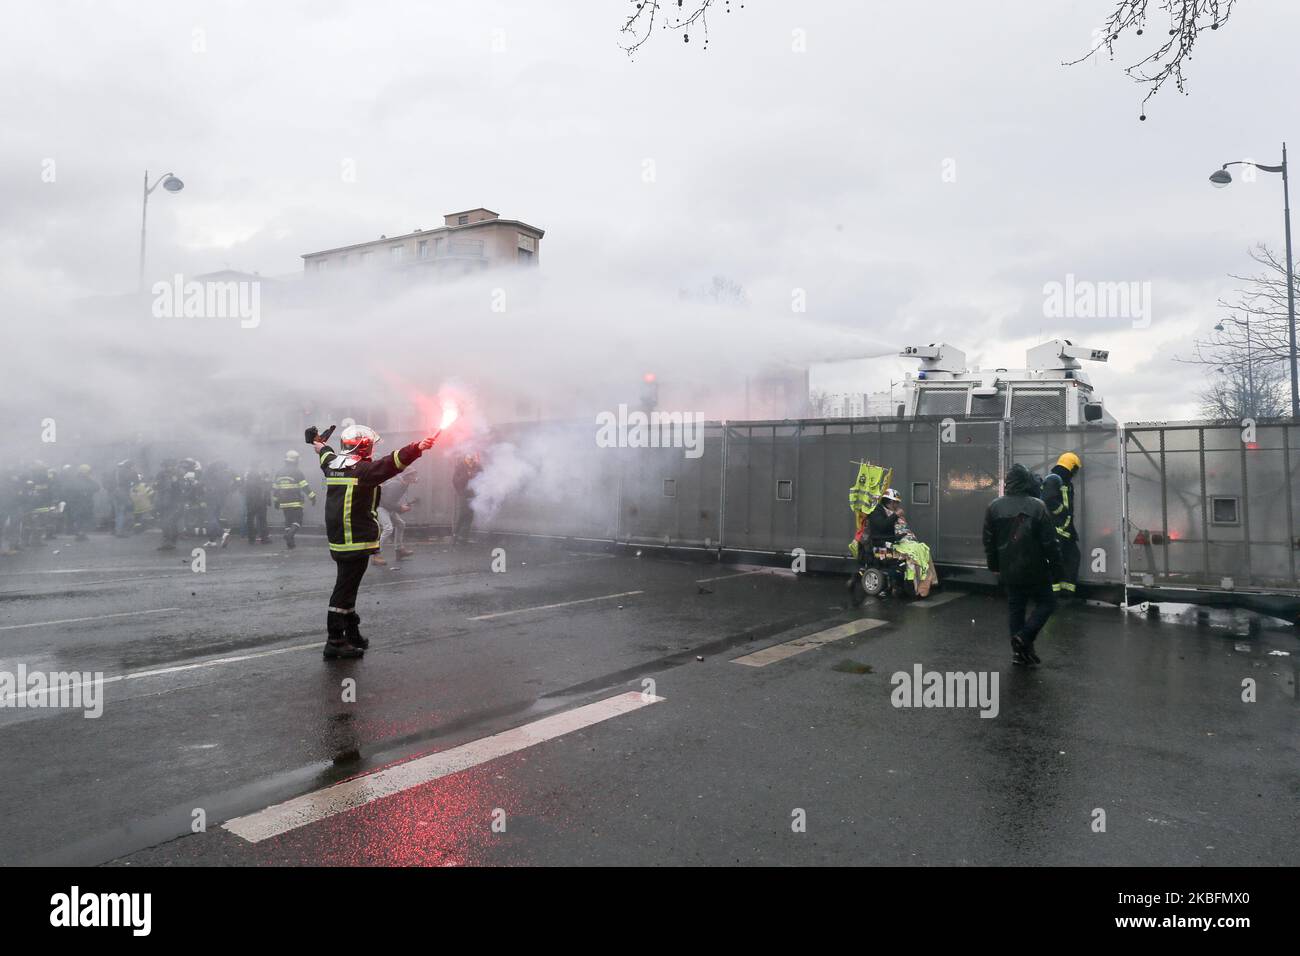 A firefighter stands in front of water canons during a demonstration to protest against French government's plan to overhaul the country's retirement system in Paris, on January 28, 2020. (Photo by Michel Stoupak/NurPhoto) Stock Photo